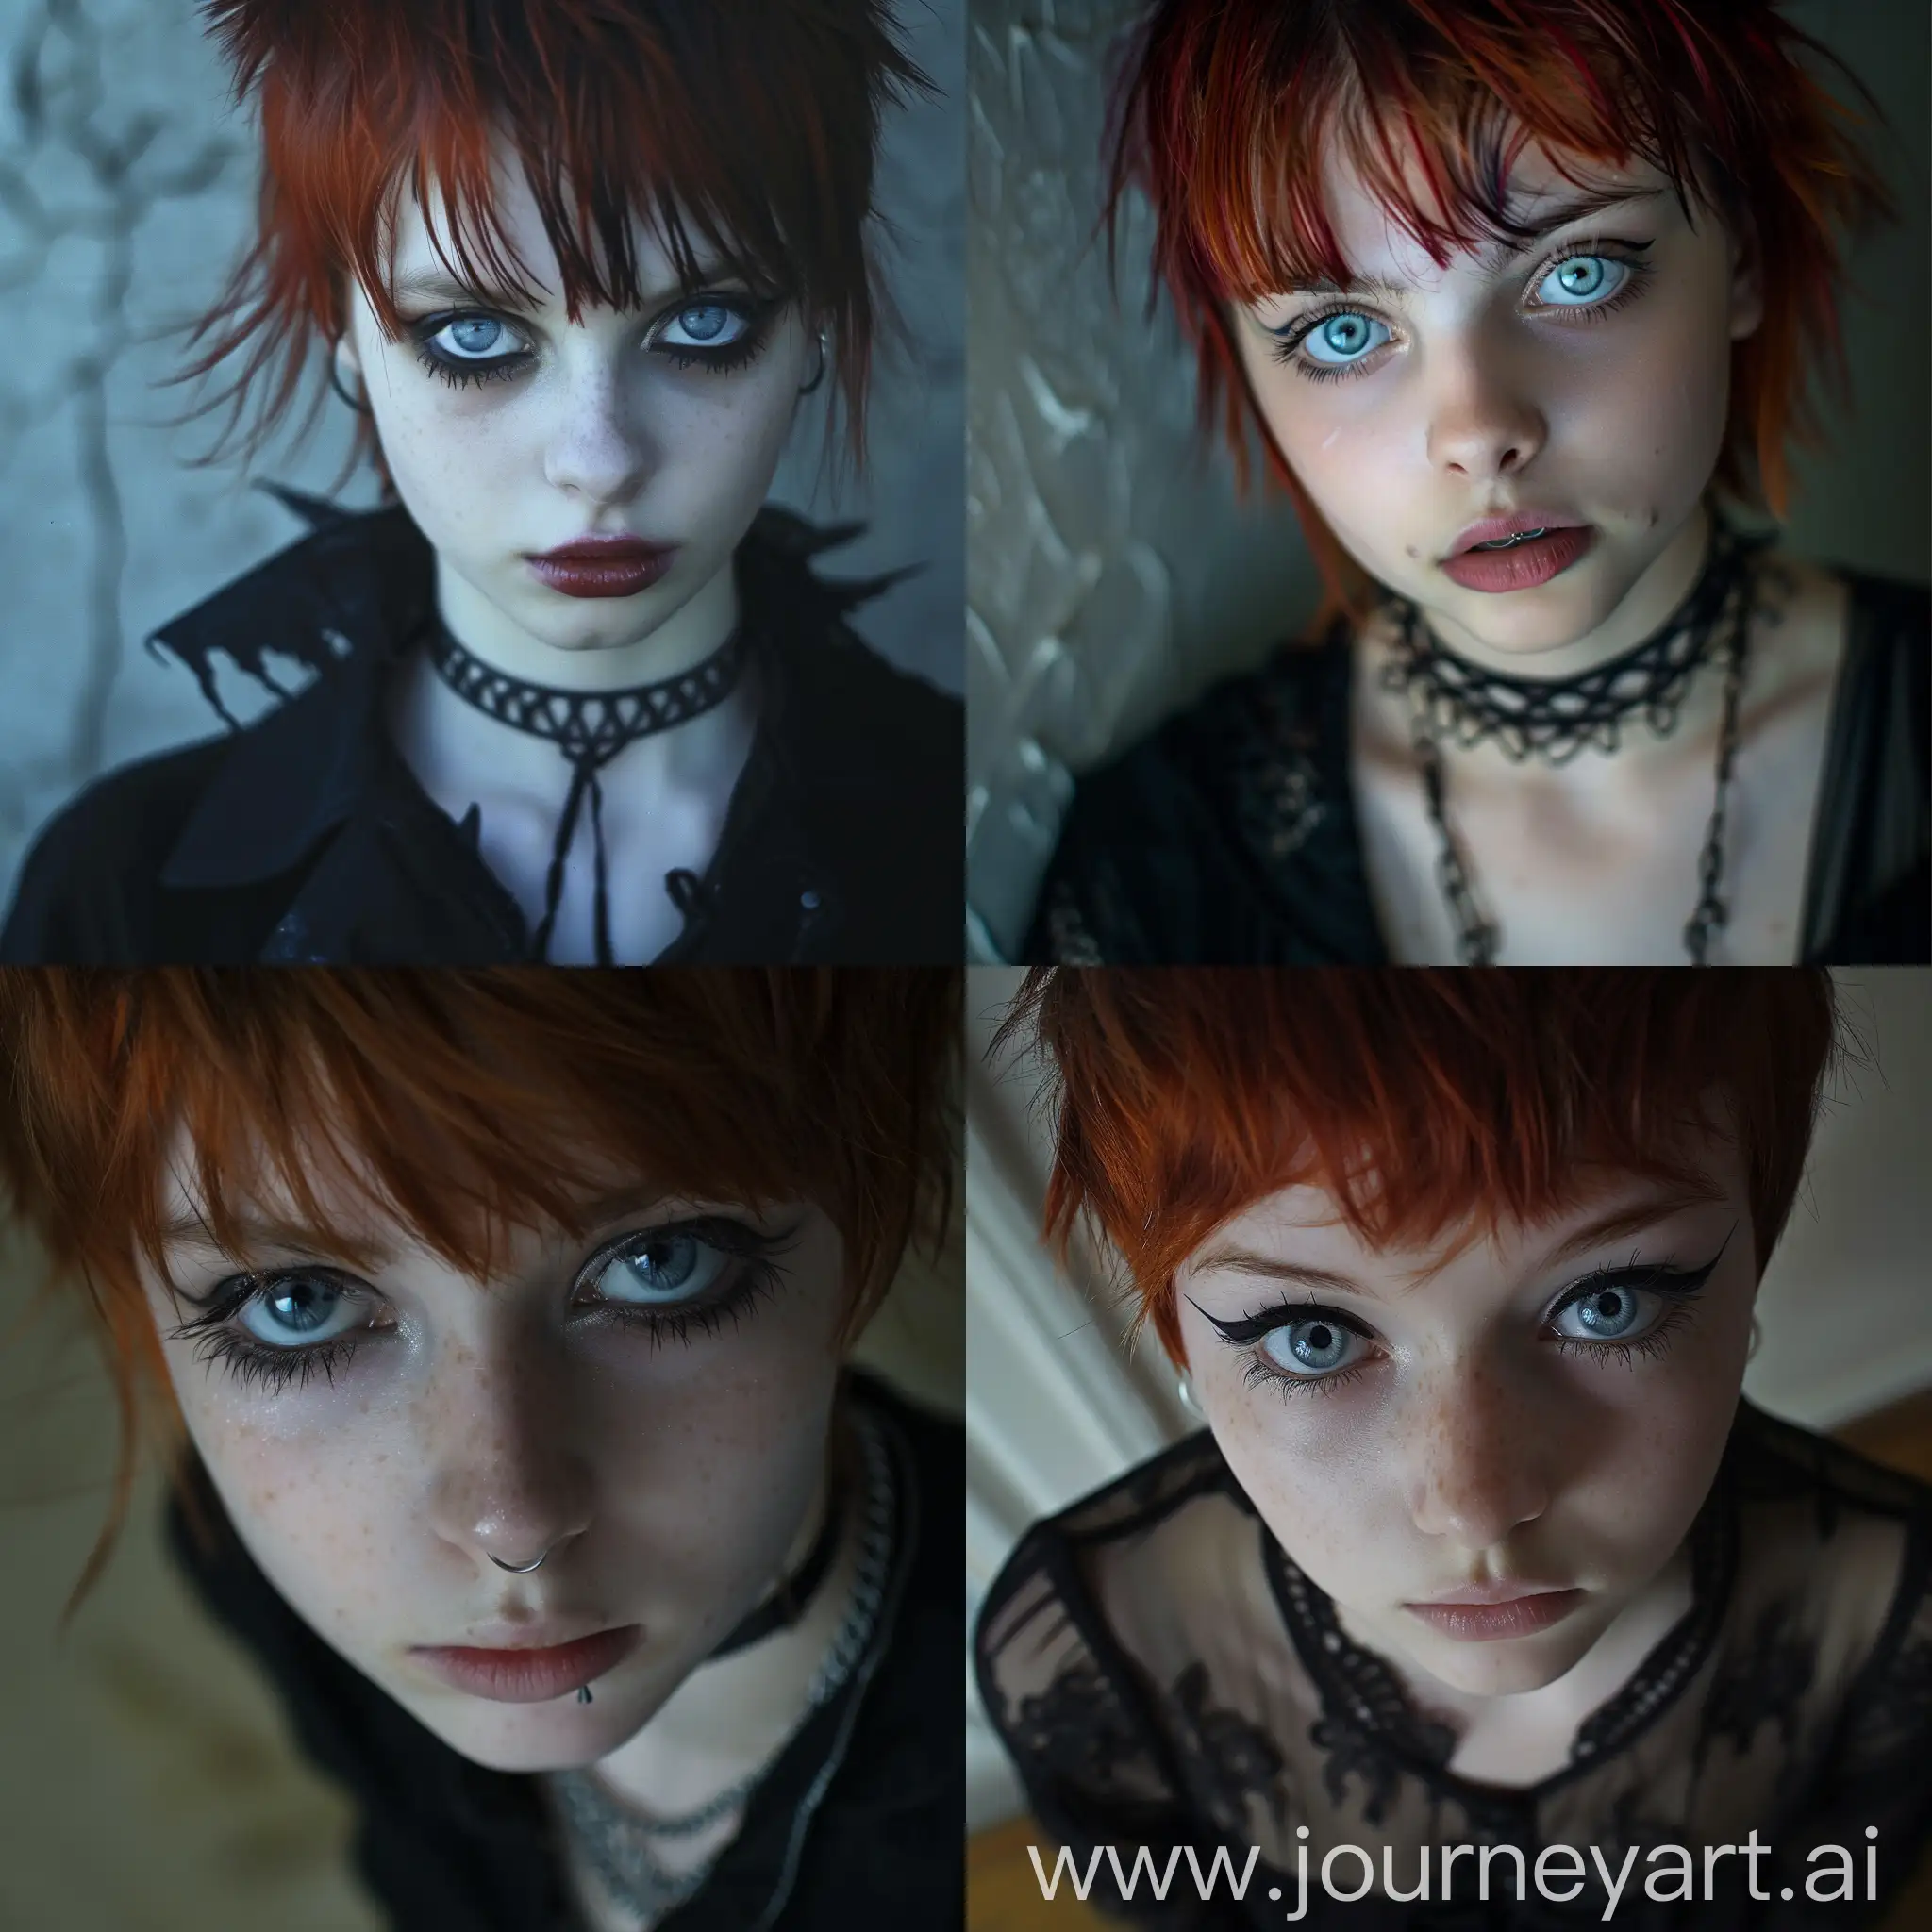 Goth-Teen-Girl-with-Pixie-Cut-and-Red-Hair-in-Icy-Blue-Eyes-Portrait